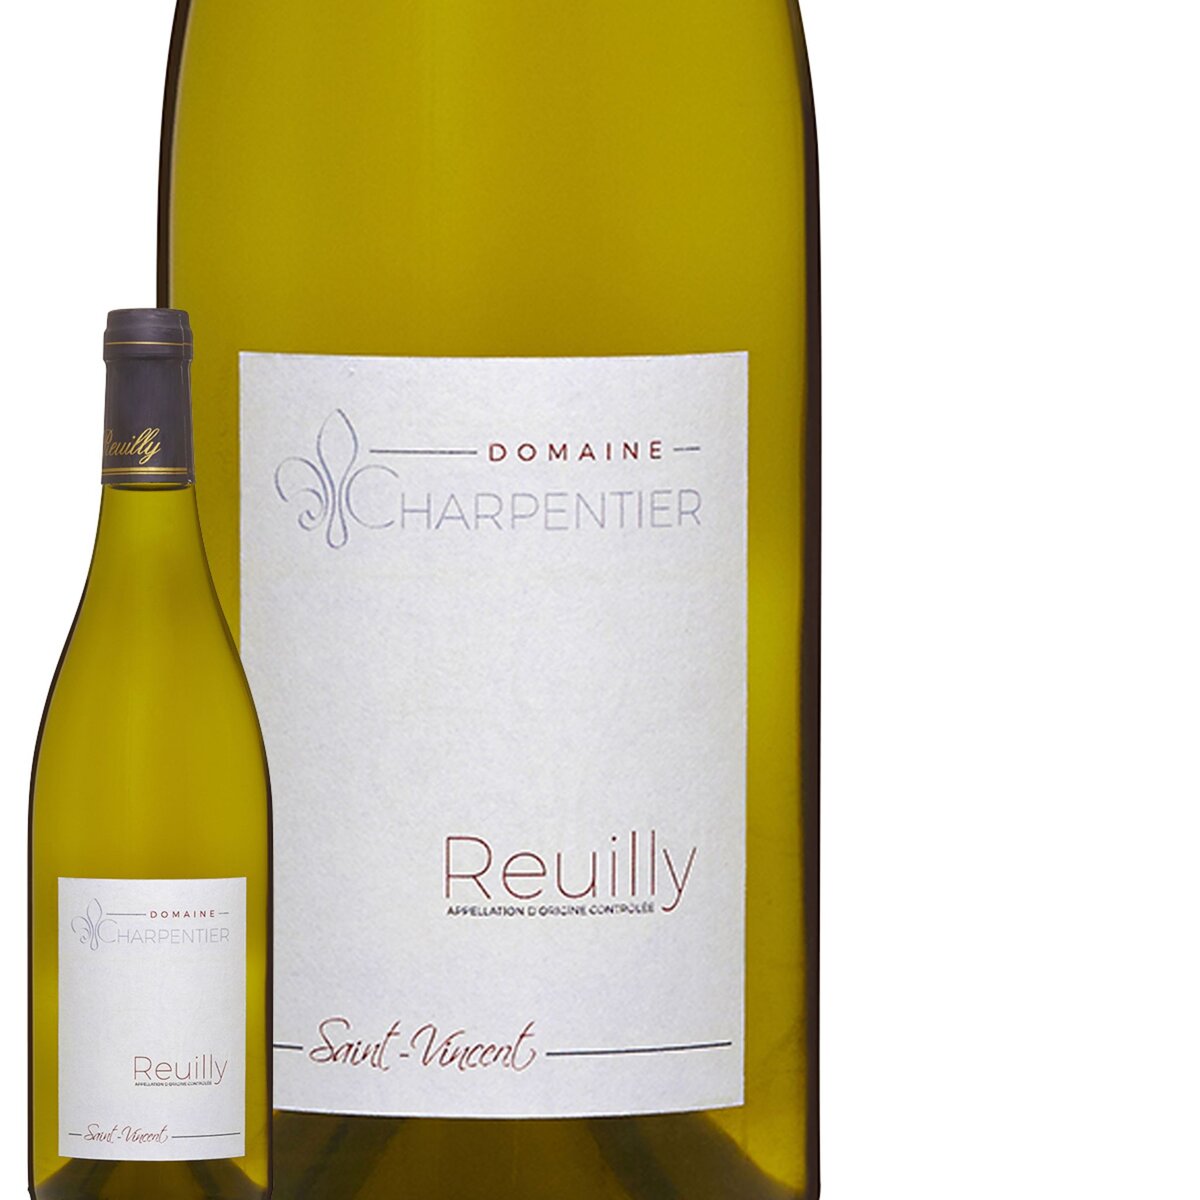 Domaine Charpentier Reuilly Blanc 2016